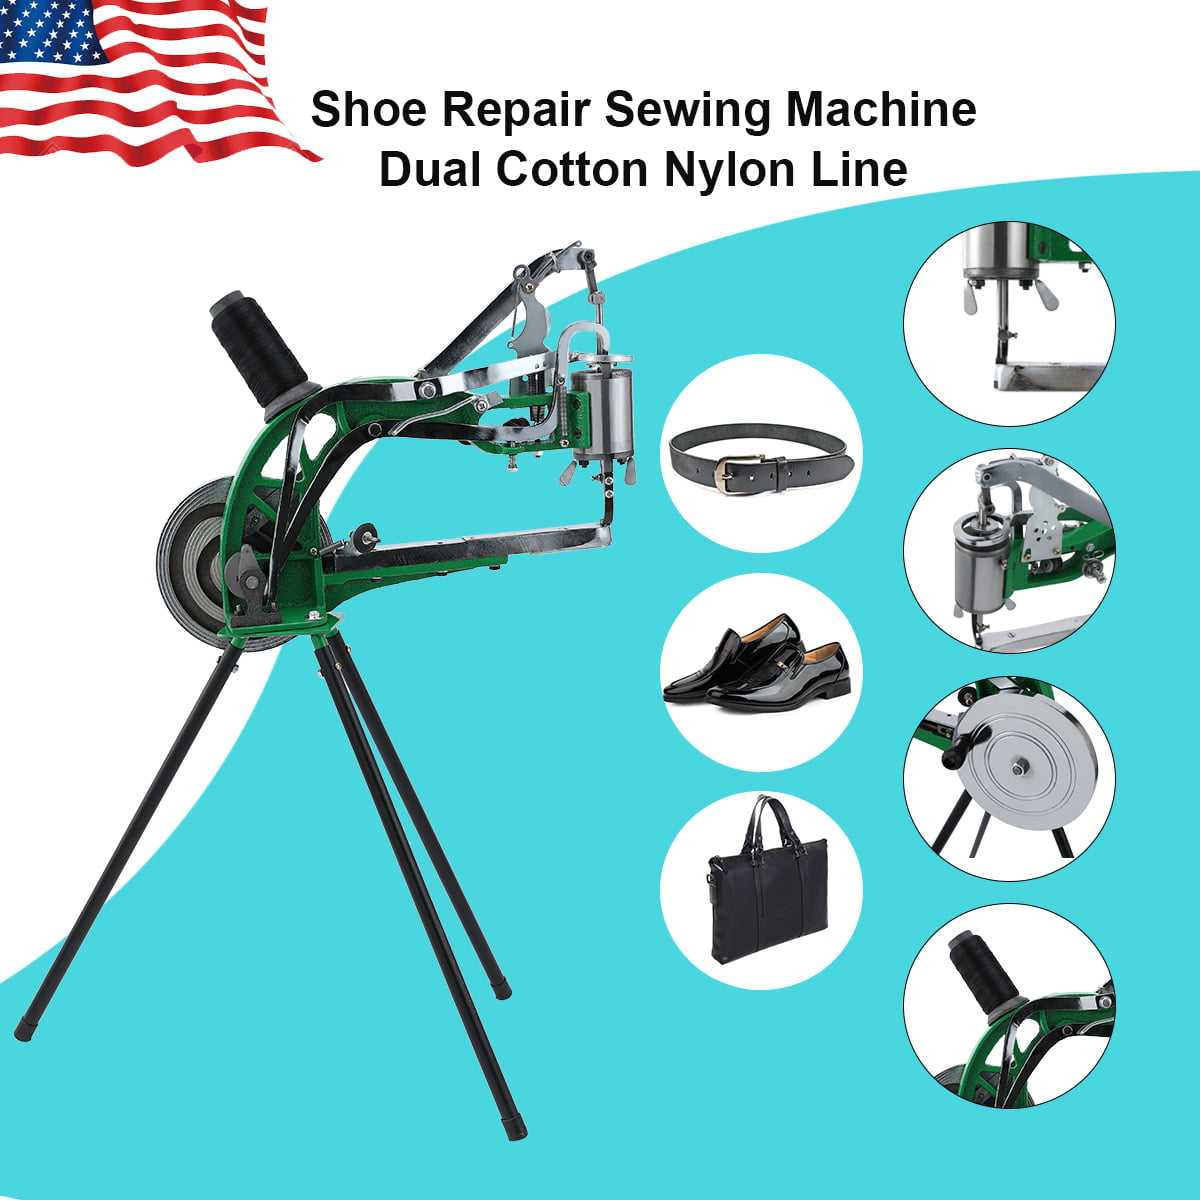 Shoe Repair Machine for Manual Sewing Dual Cotton Nylon 48pcs DIY Leather Tools for sale online 